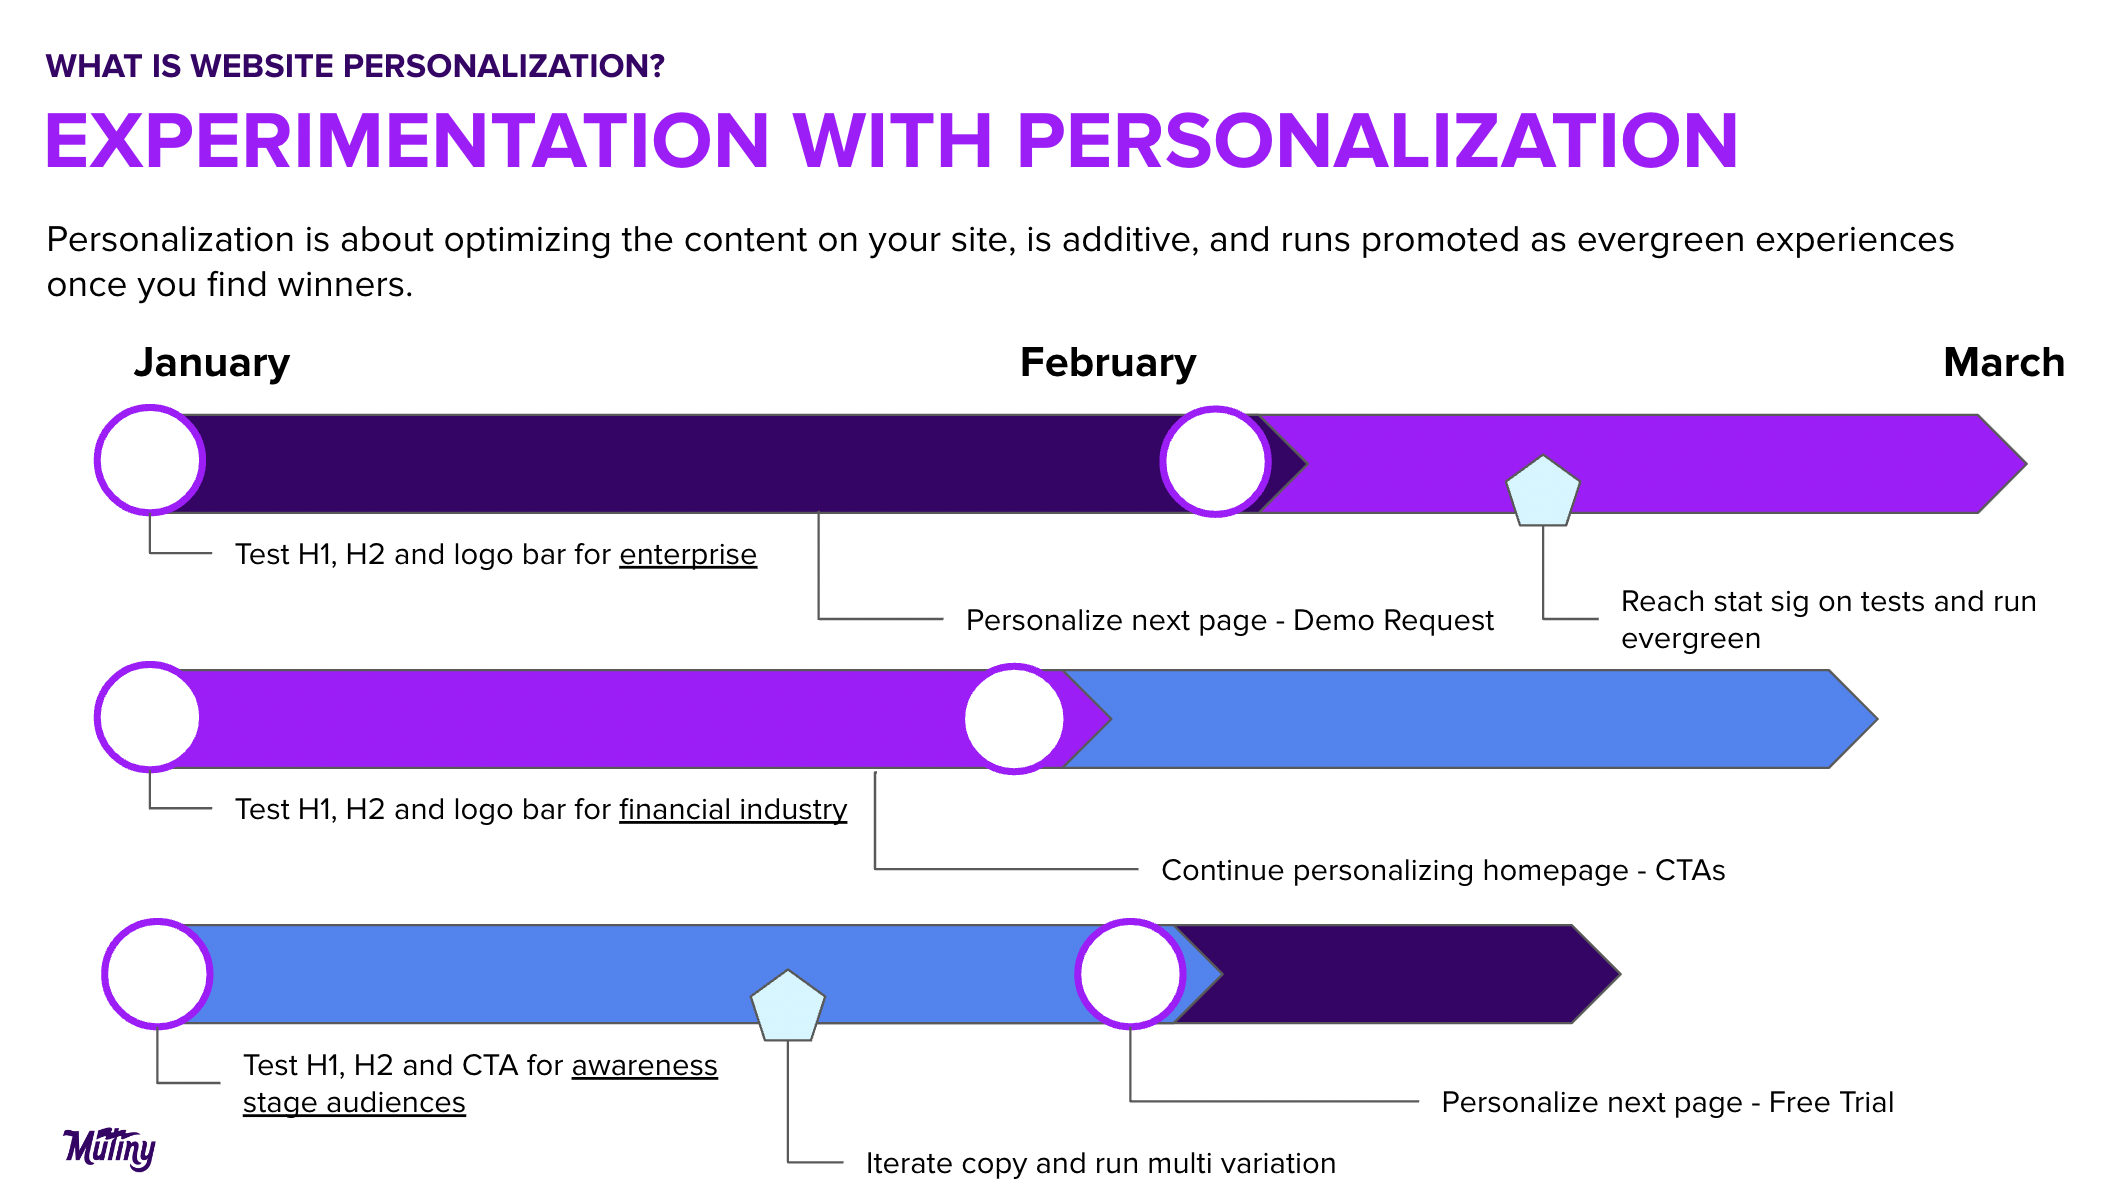 Best Practices in Optimization, Personalization, and Testing